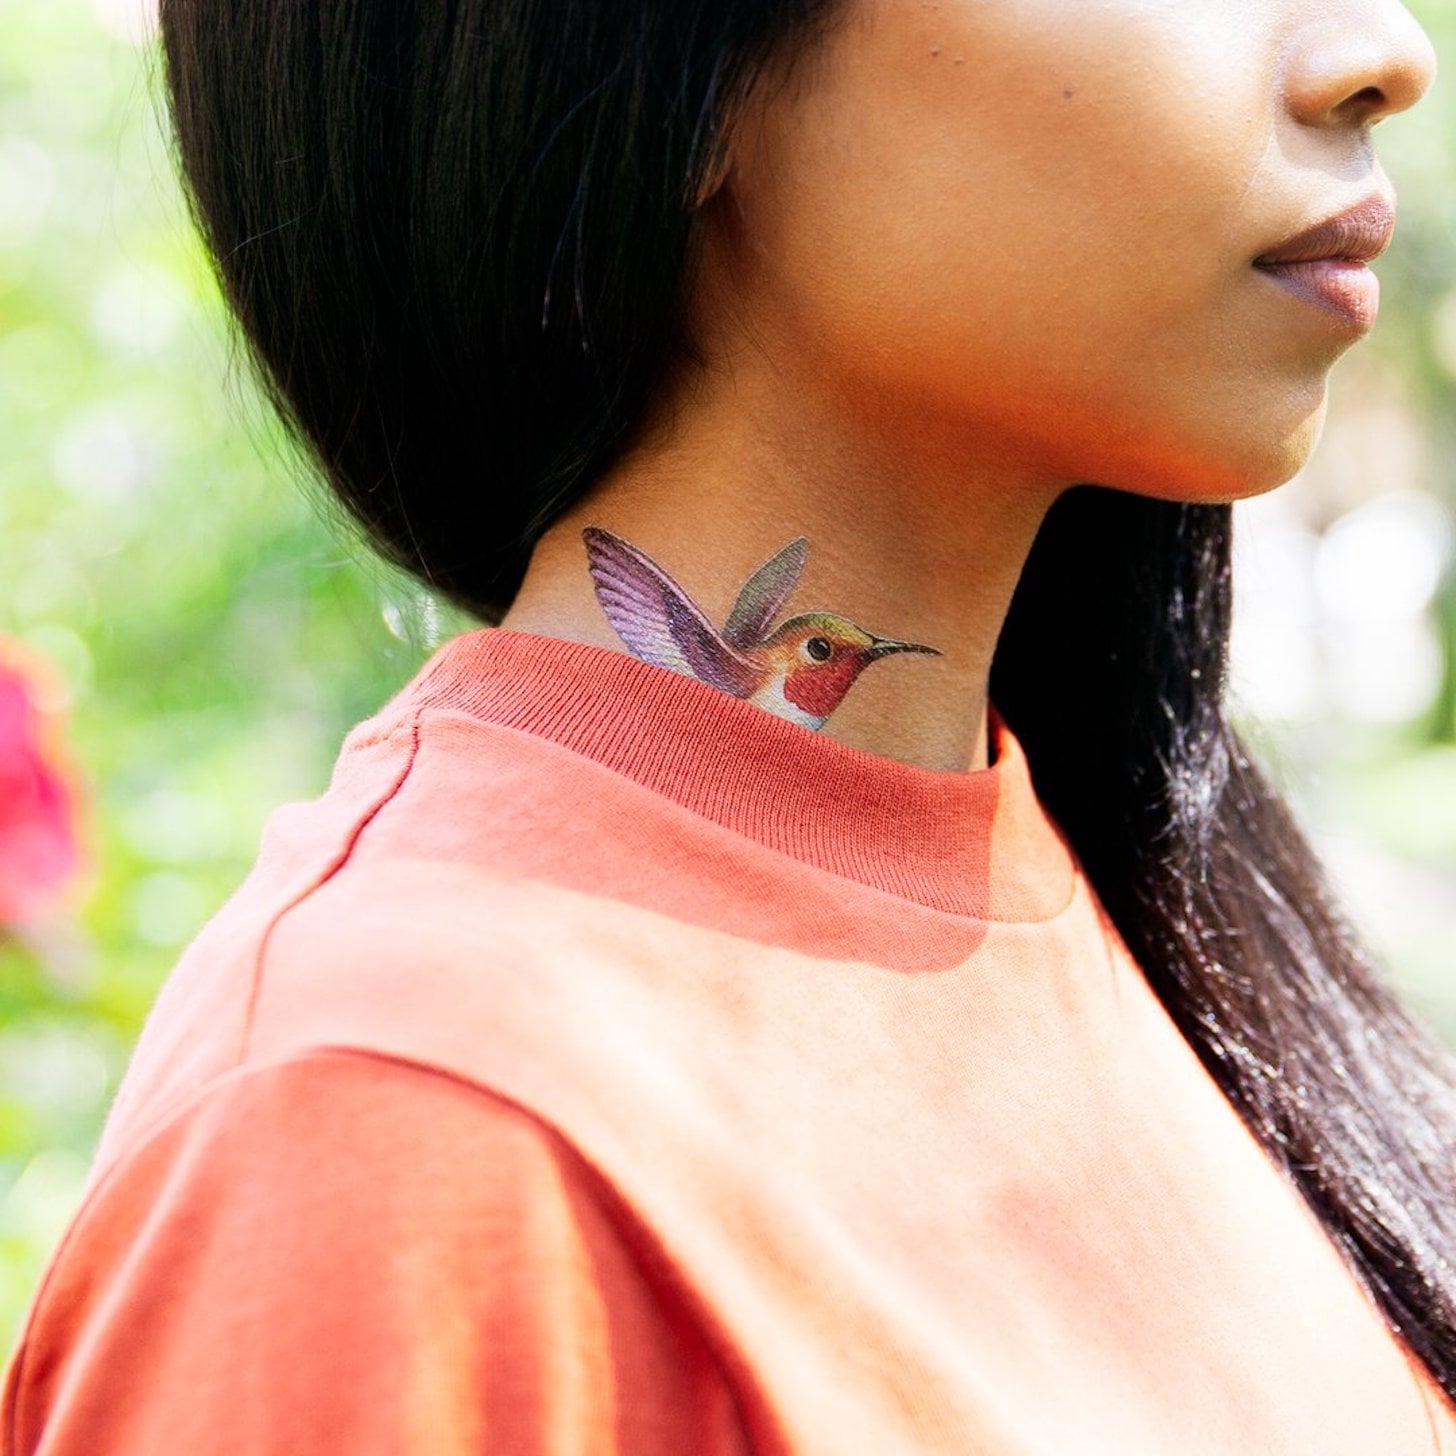 Where You Can Buy Temporary Tattoos That Look Real | POPSUGAR Beauty